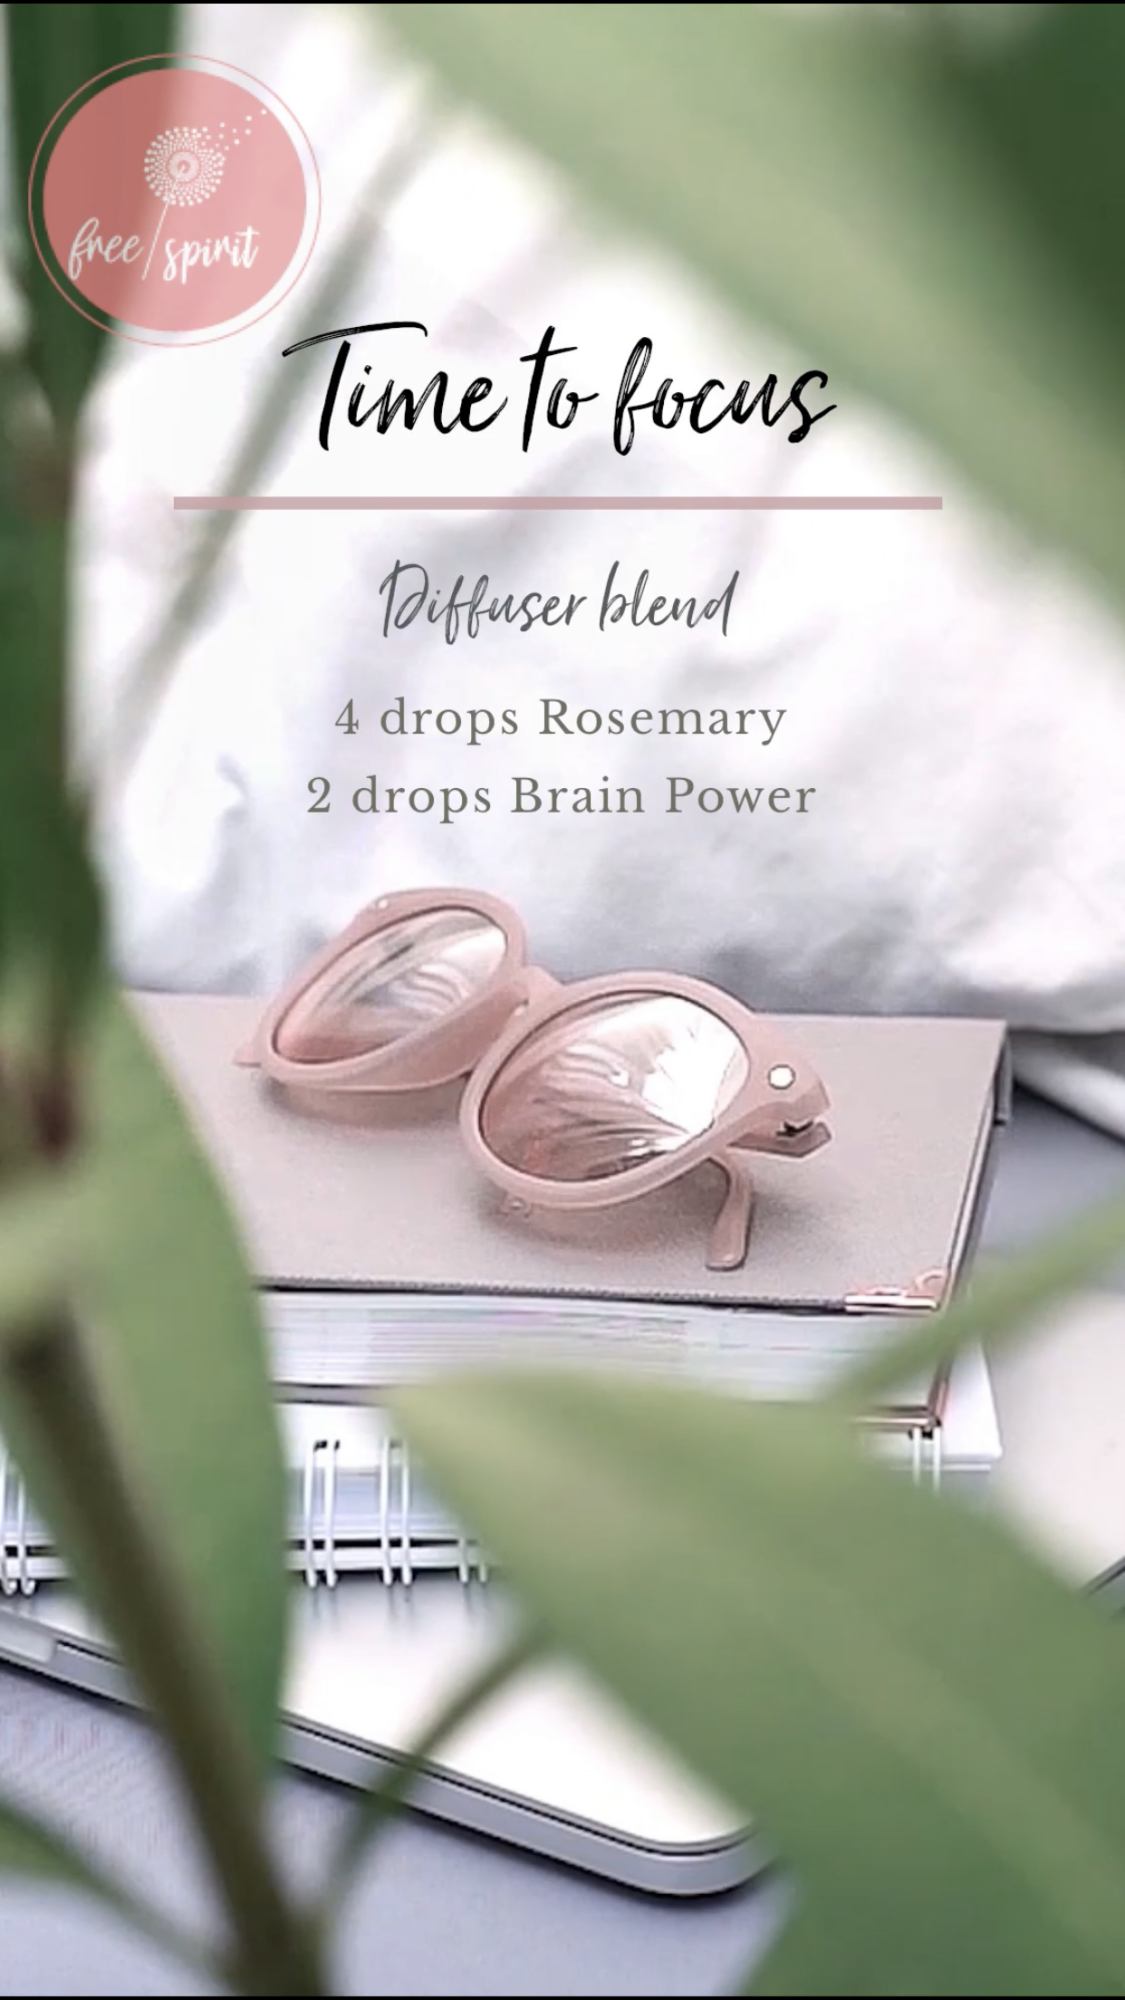 TIME TO FOCUS DIFFUSER BLEND